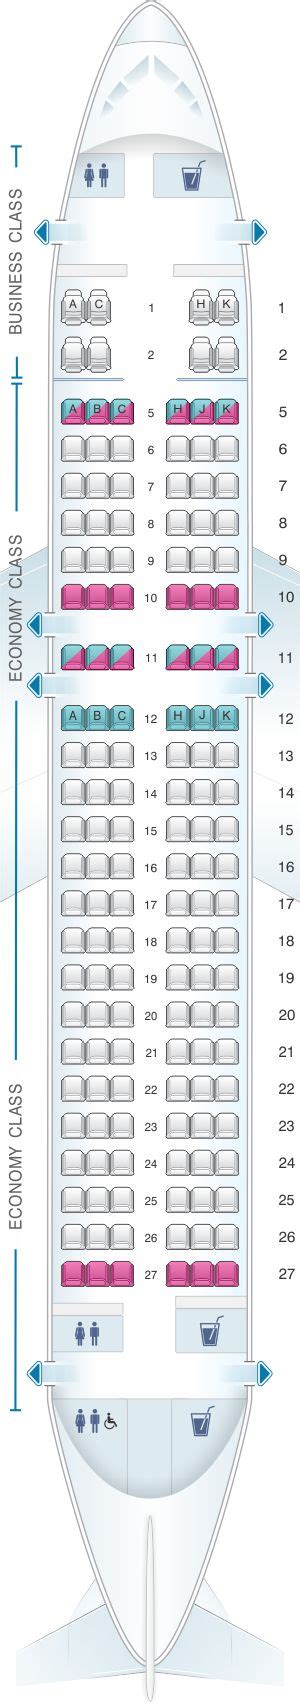 Seat Map Air China Airbus A320 200neo Seatmaestro Images And Photos